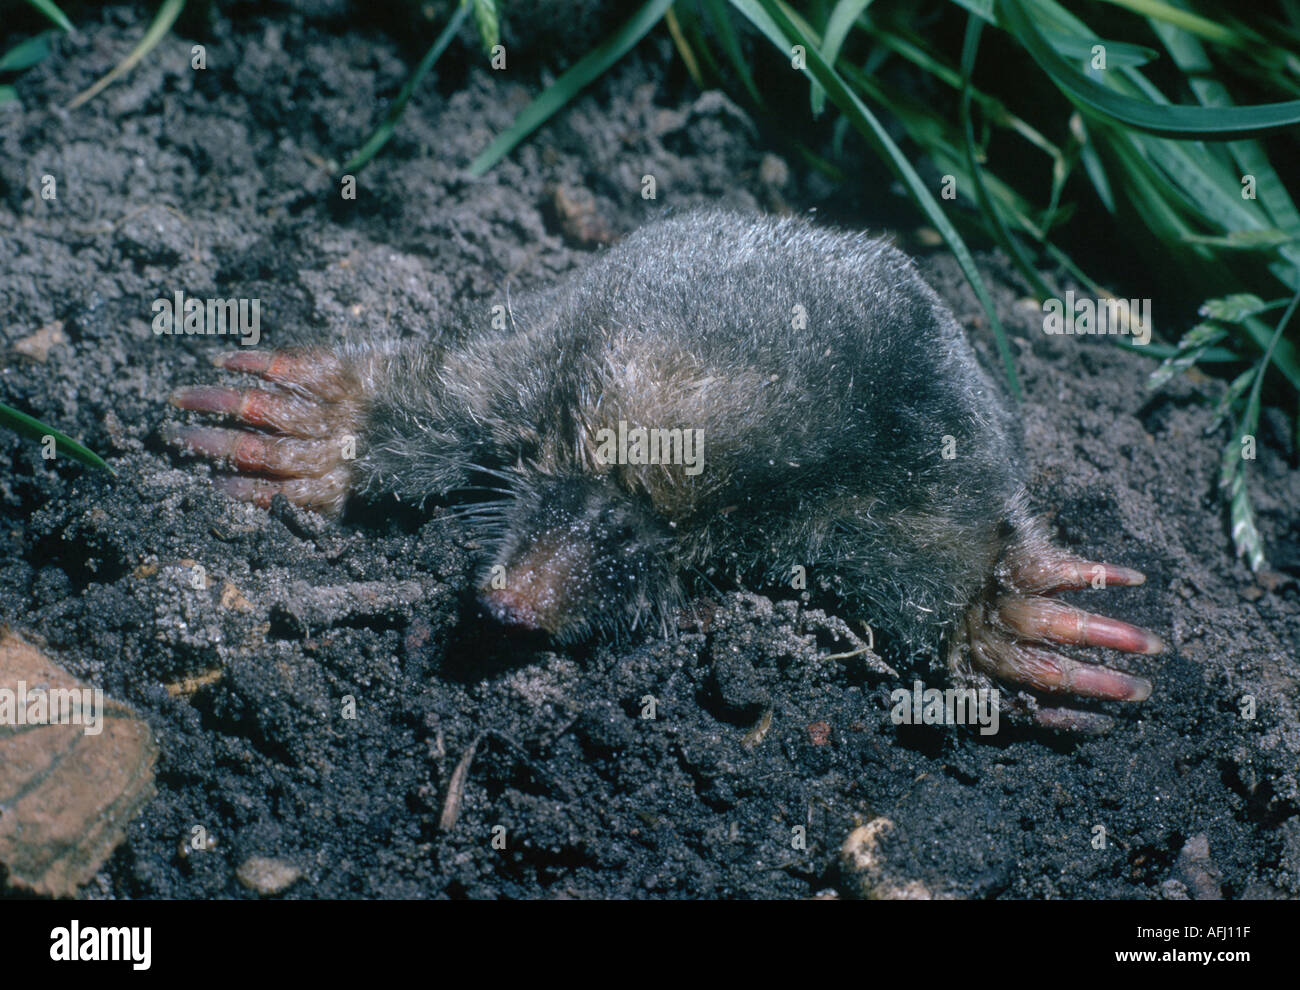 Mole showing digging fore legs Stock Photo